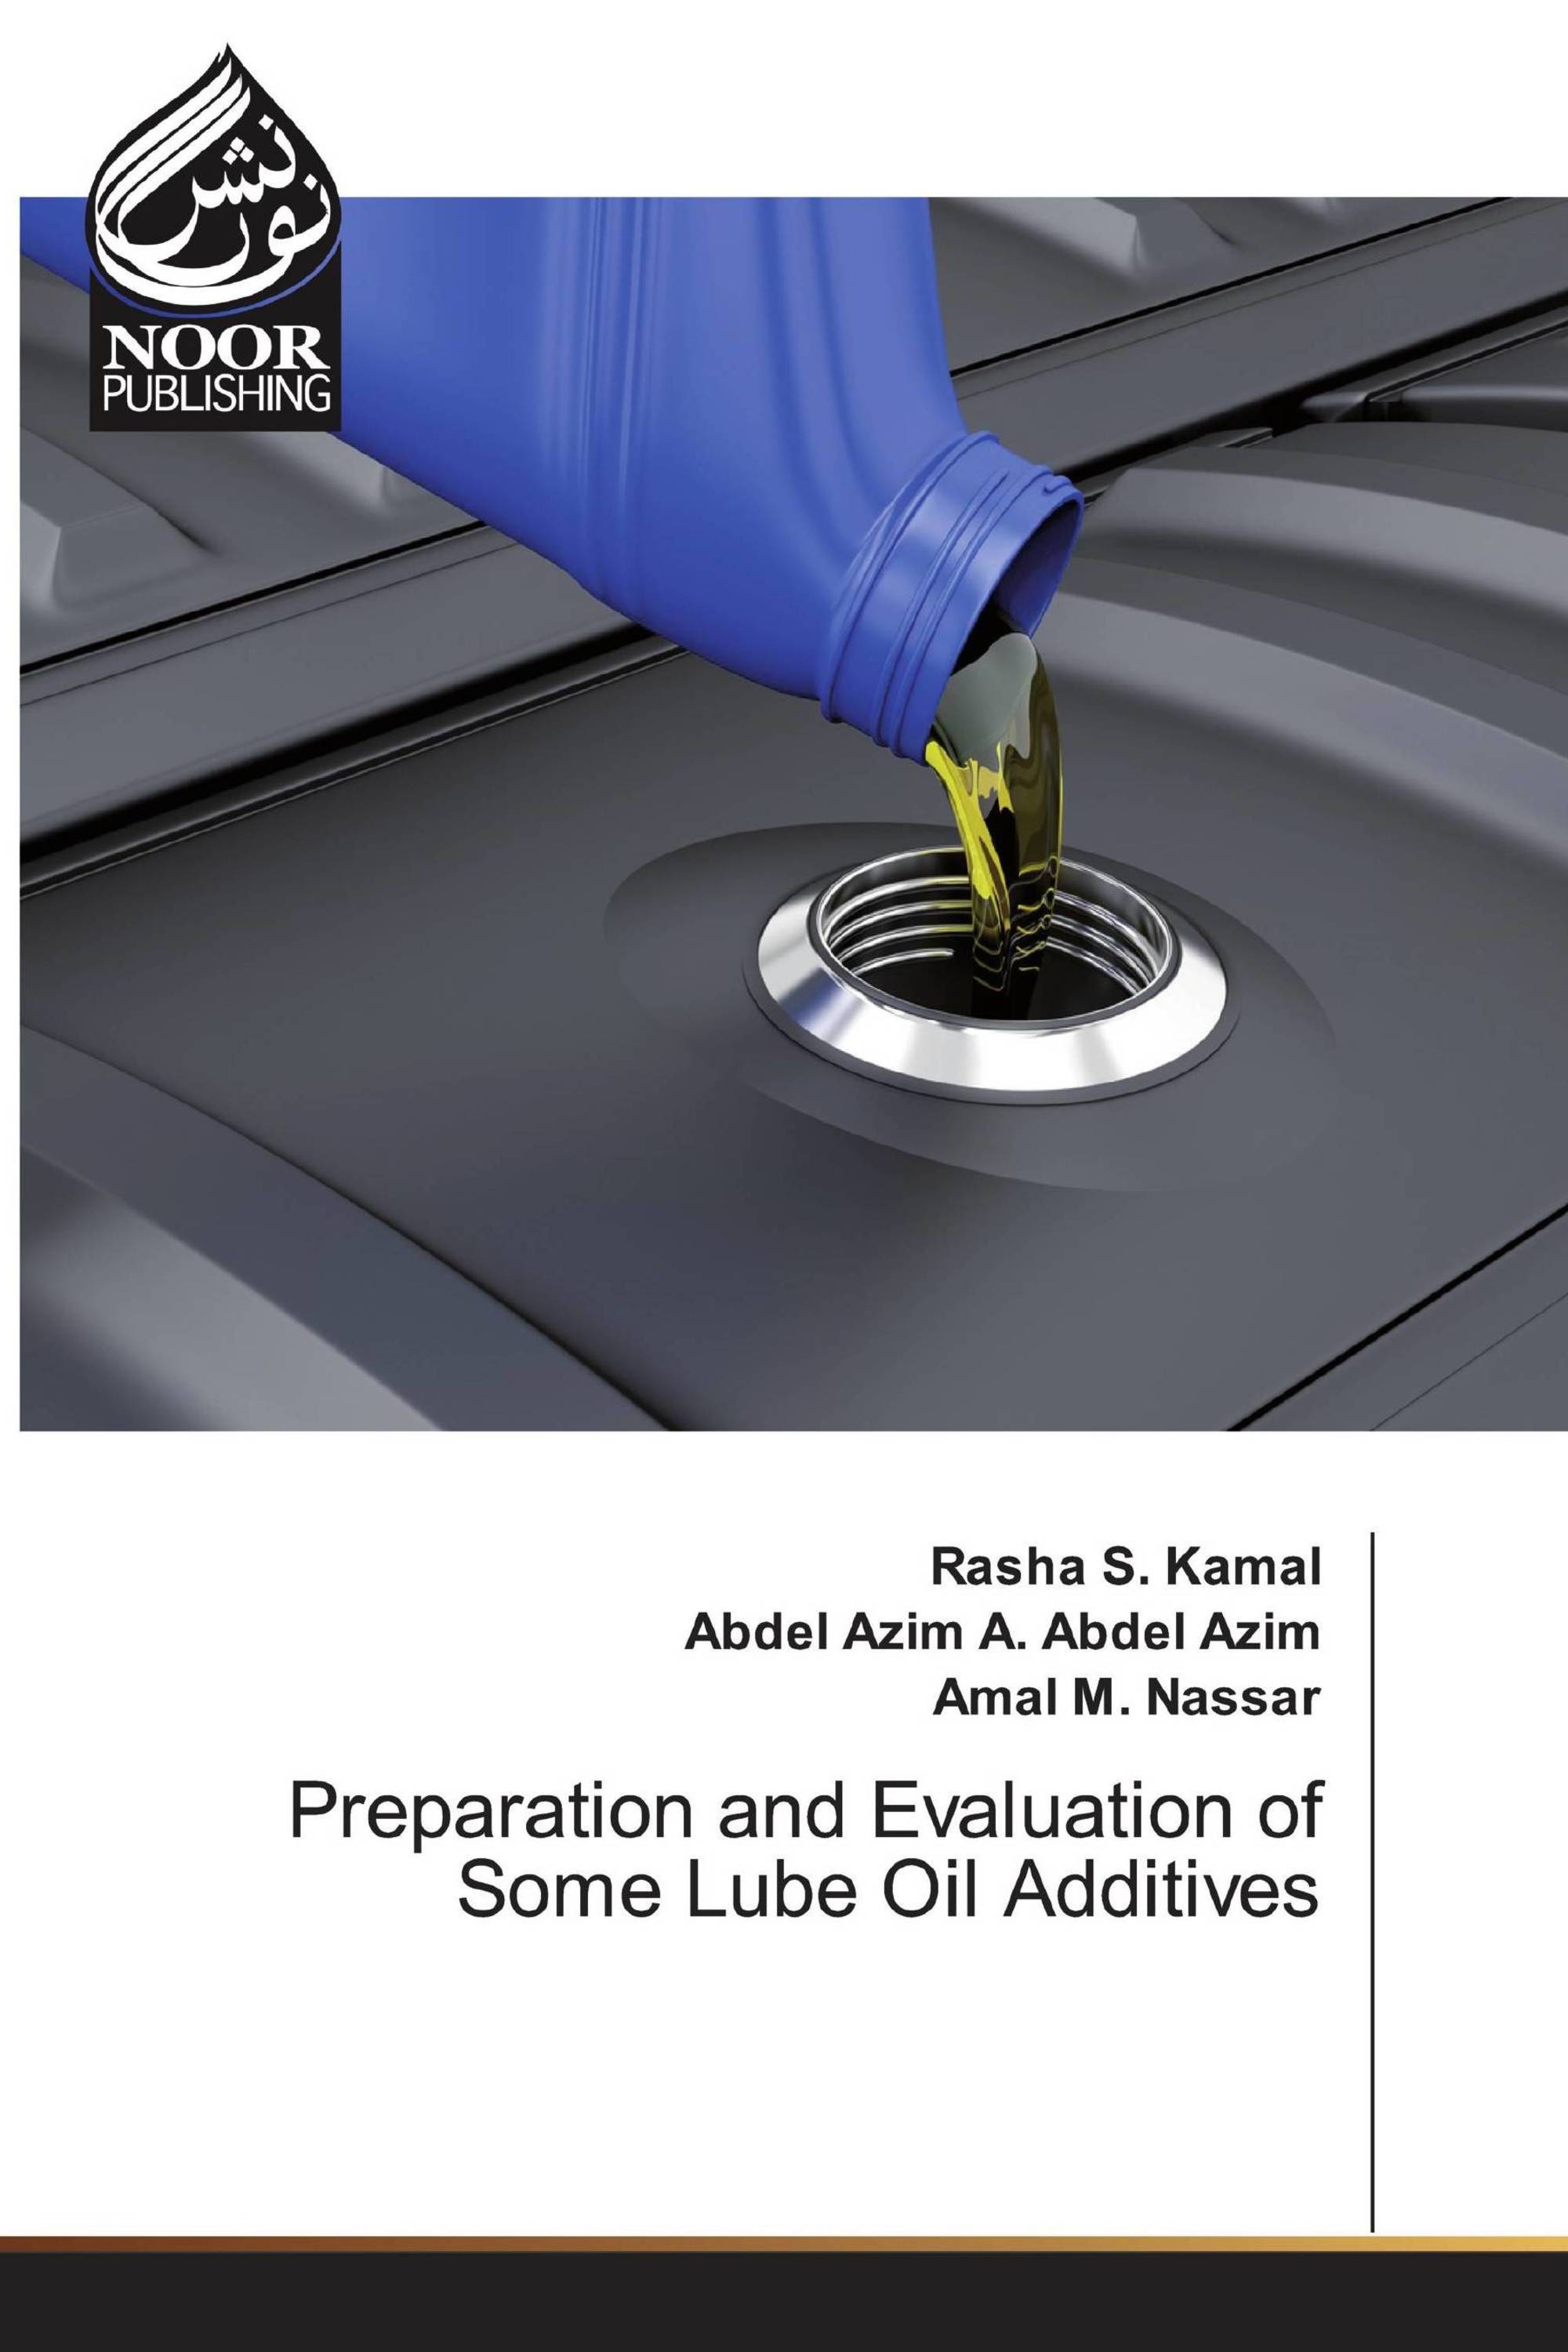 Preparation and Evaluation of Some Lube Oil Additives